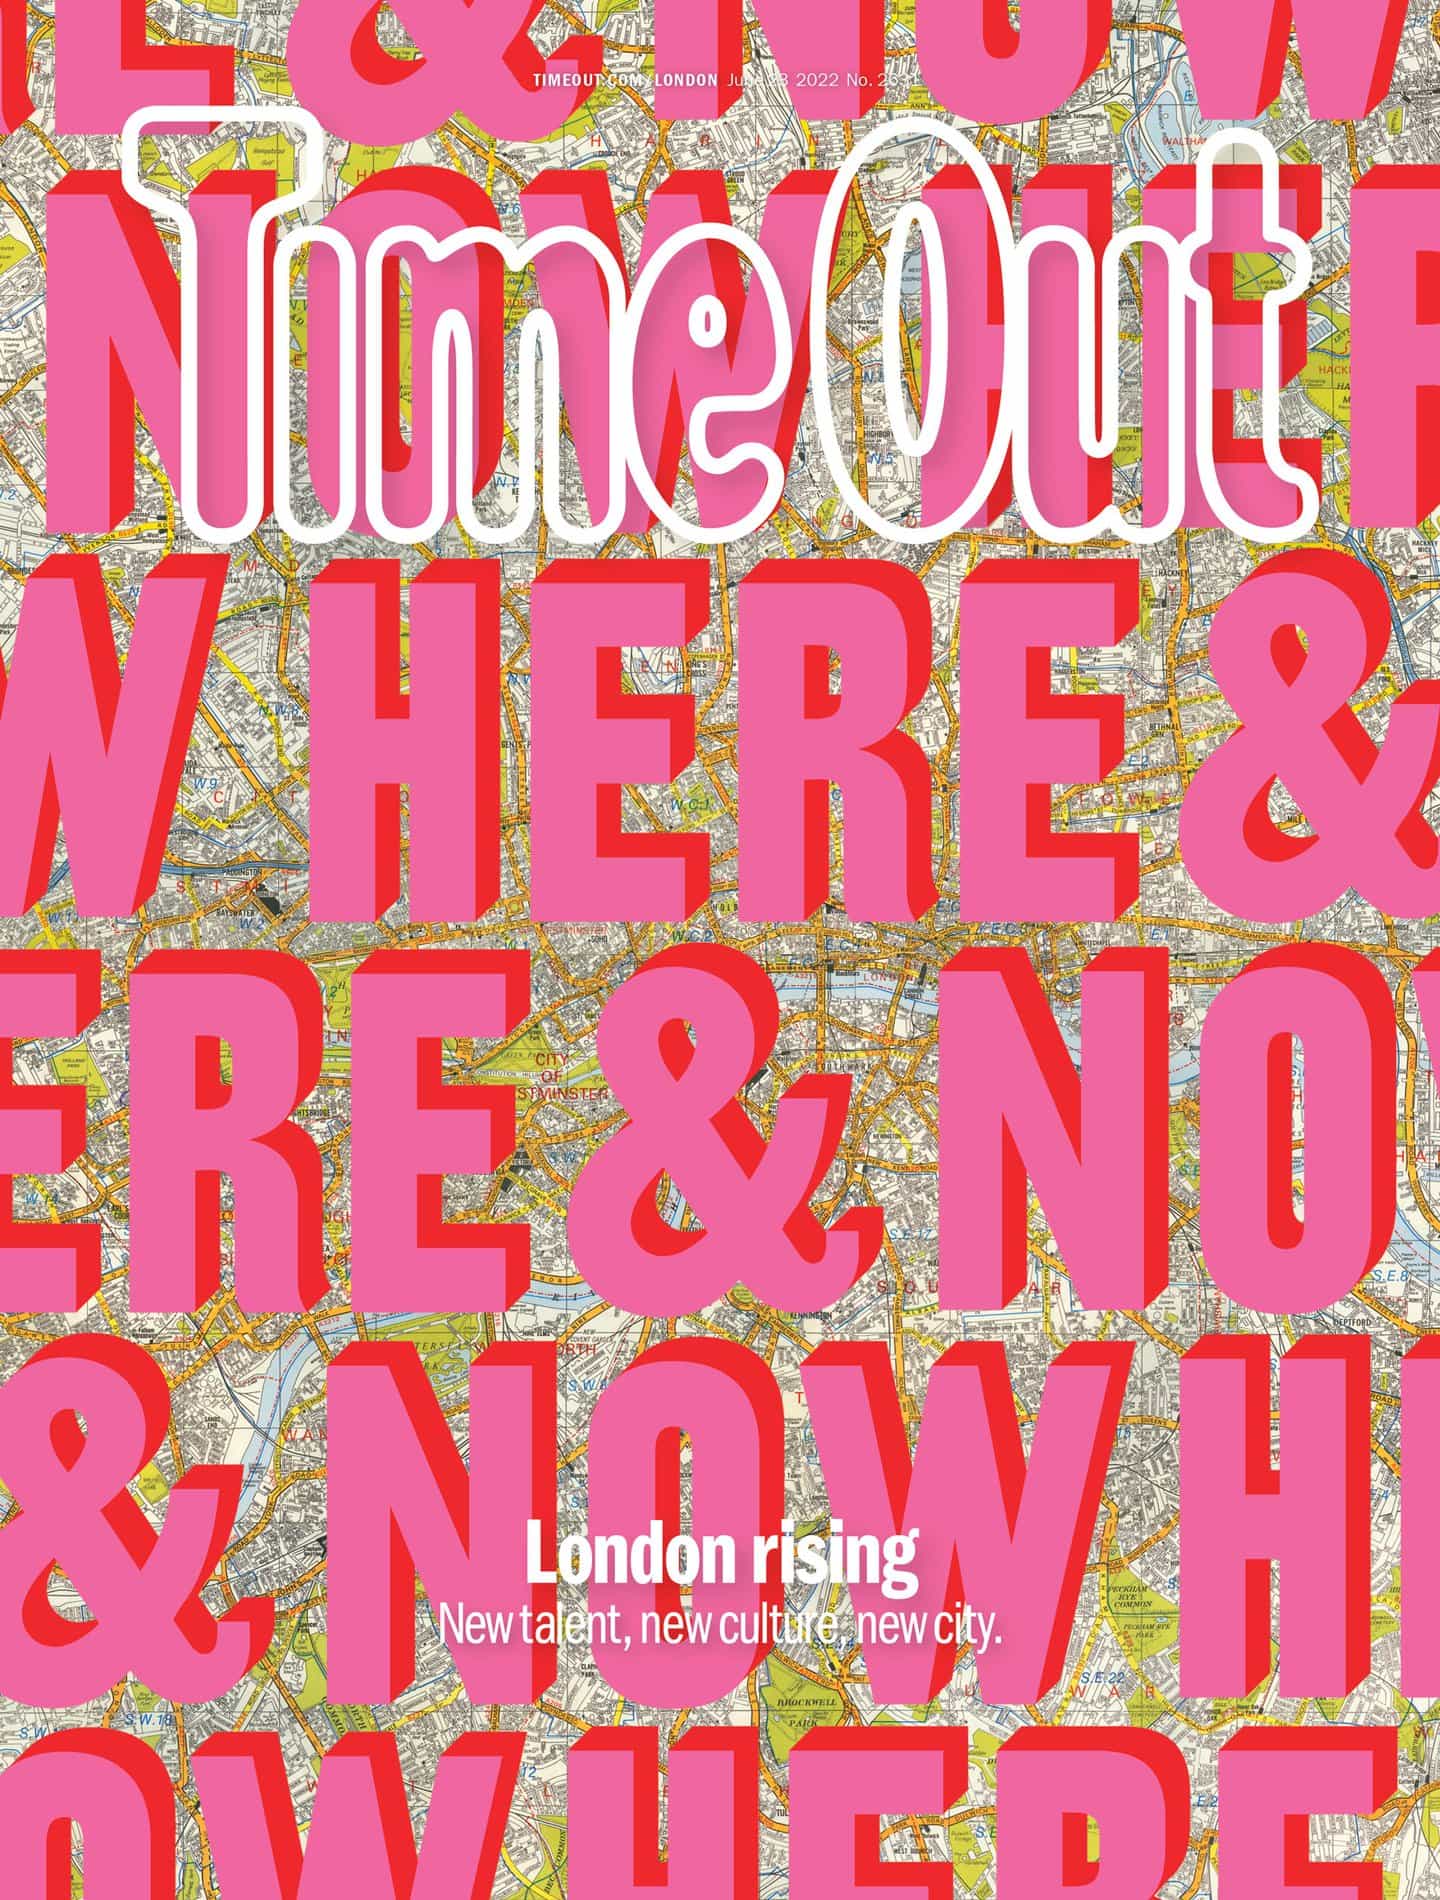 Hackney Dave: Time Out, London Rising (Copyright © Time Out, 2022)